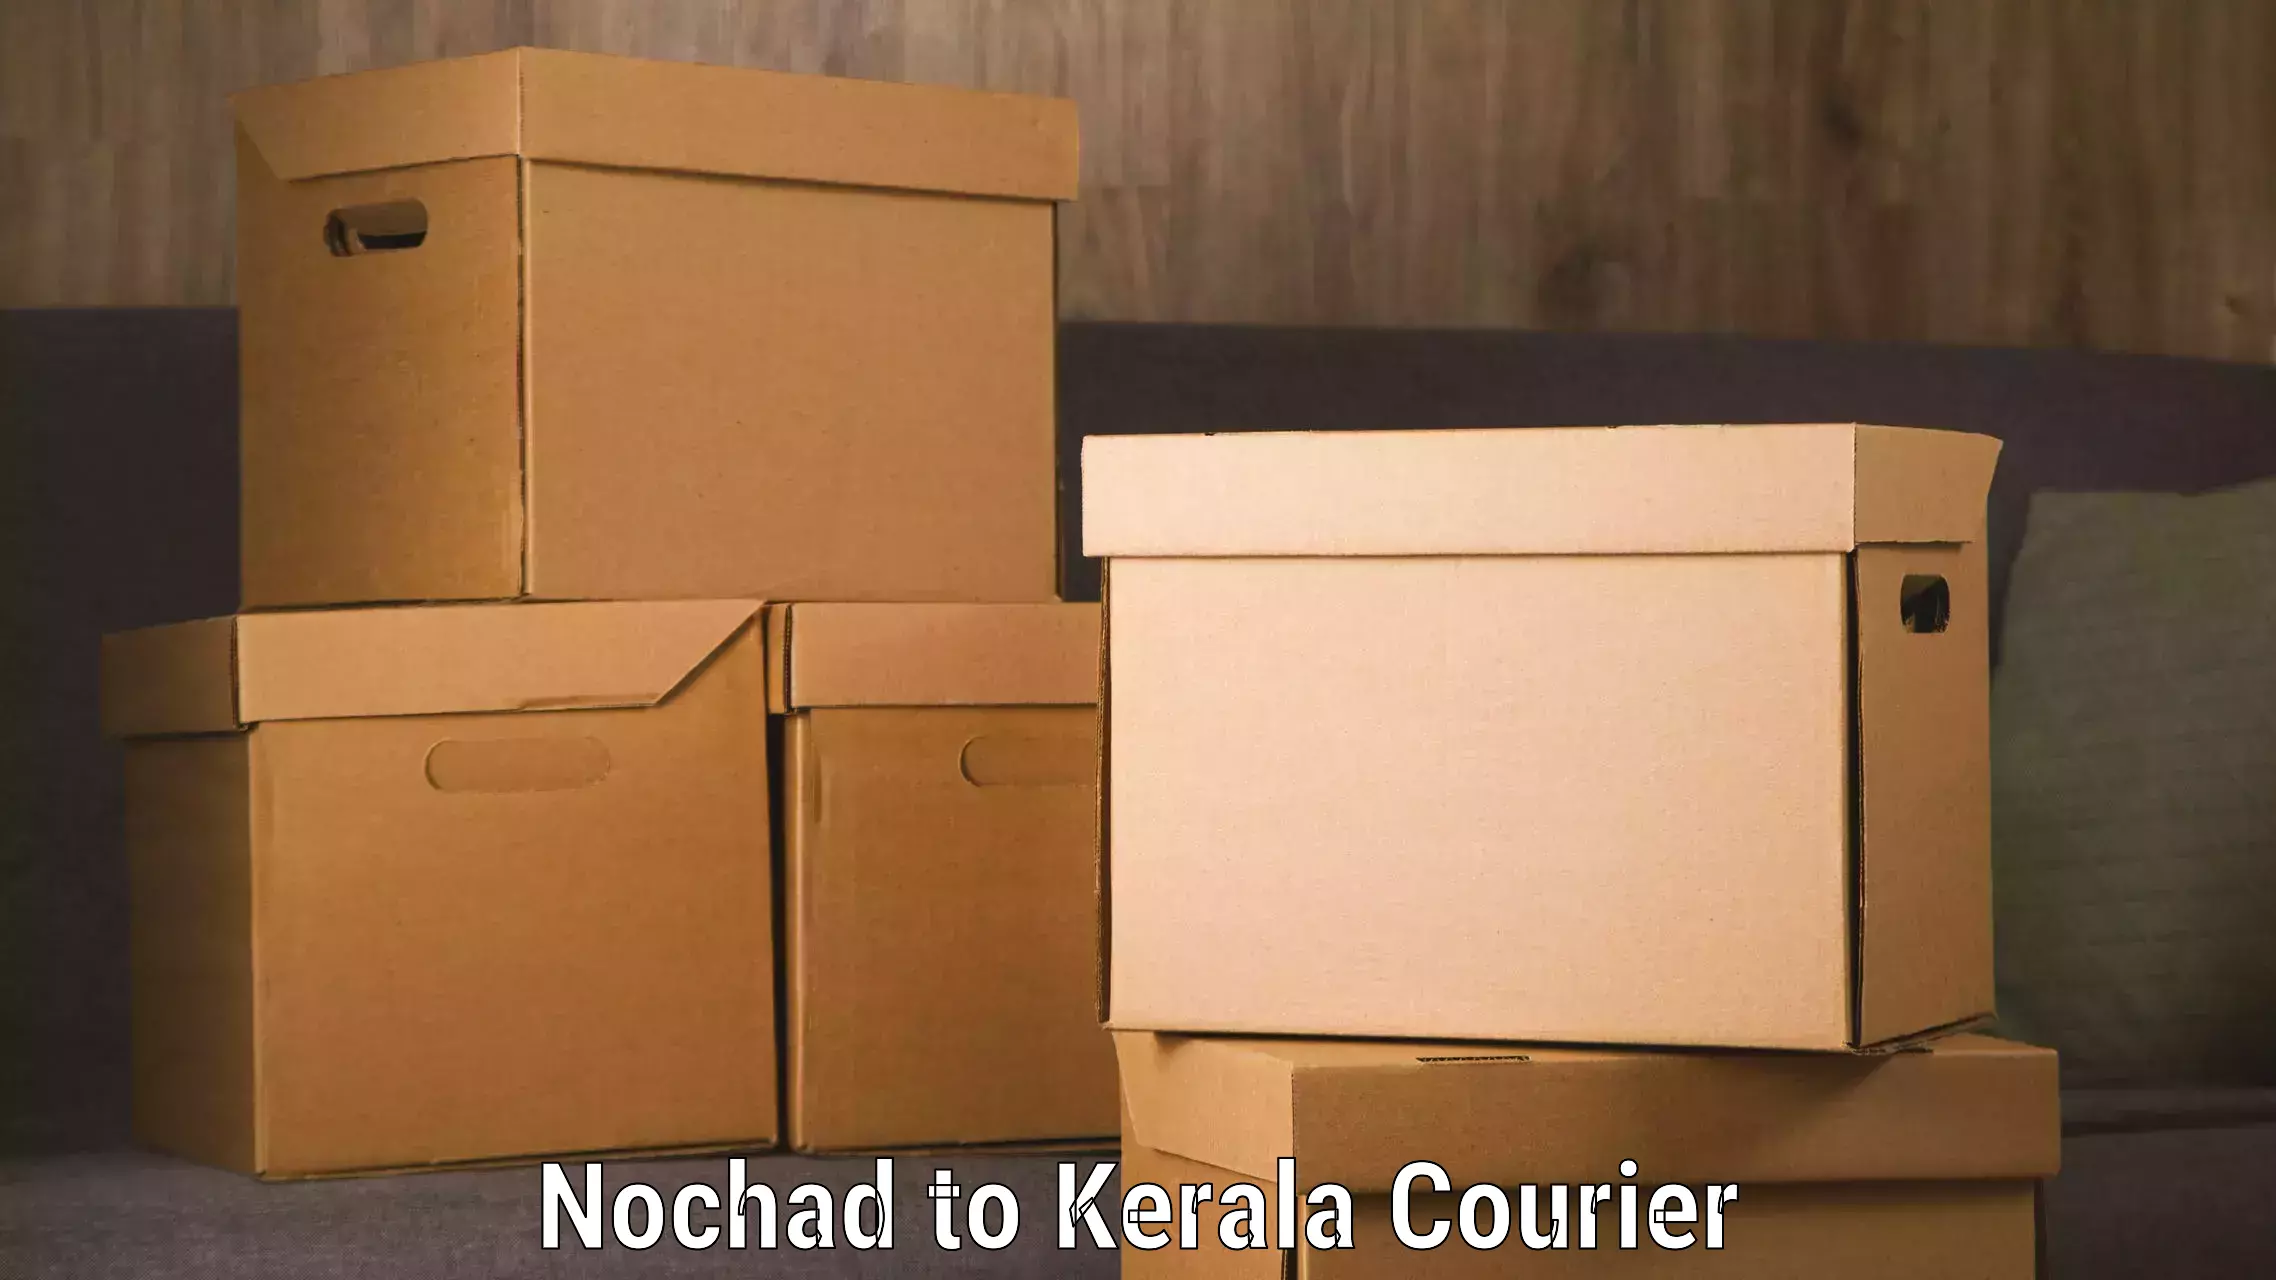 Nationwide delivery network Nochad to Kerala